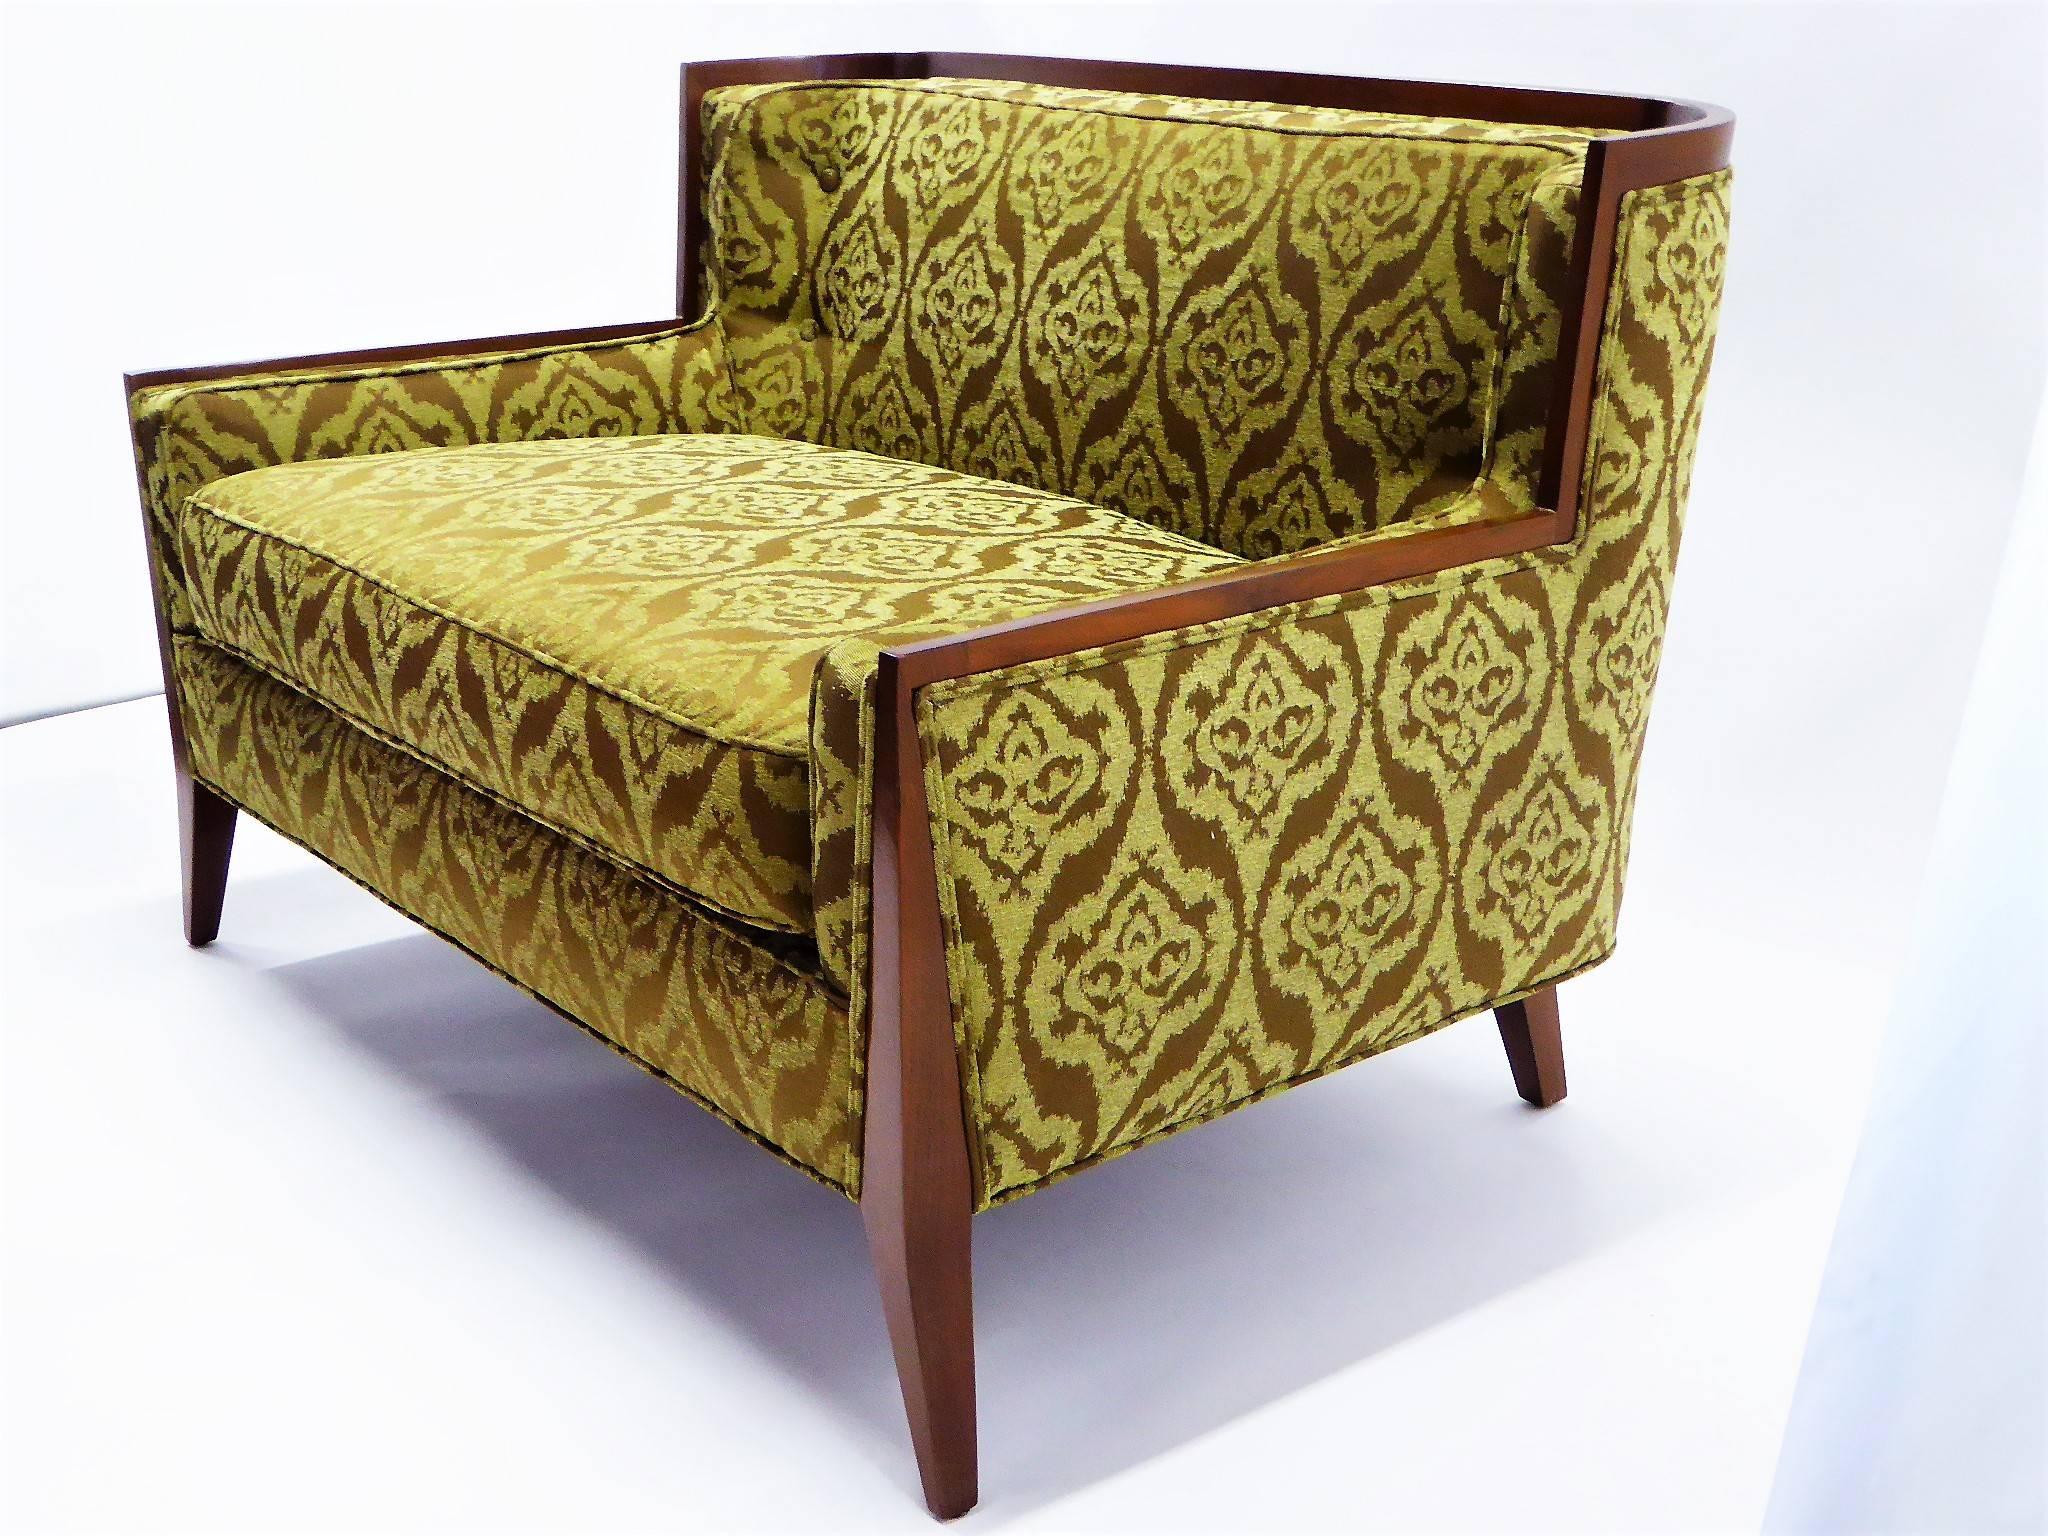 REDUCED FROM $6,500....Rare to market Paul McCobb for Directional loveseat sofa restored and newly upholstered in a jacquard damask in green & brown. A smaller version of sofa model 407. Model 407 was manufactured in small numbers due to the